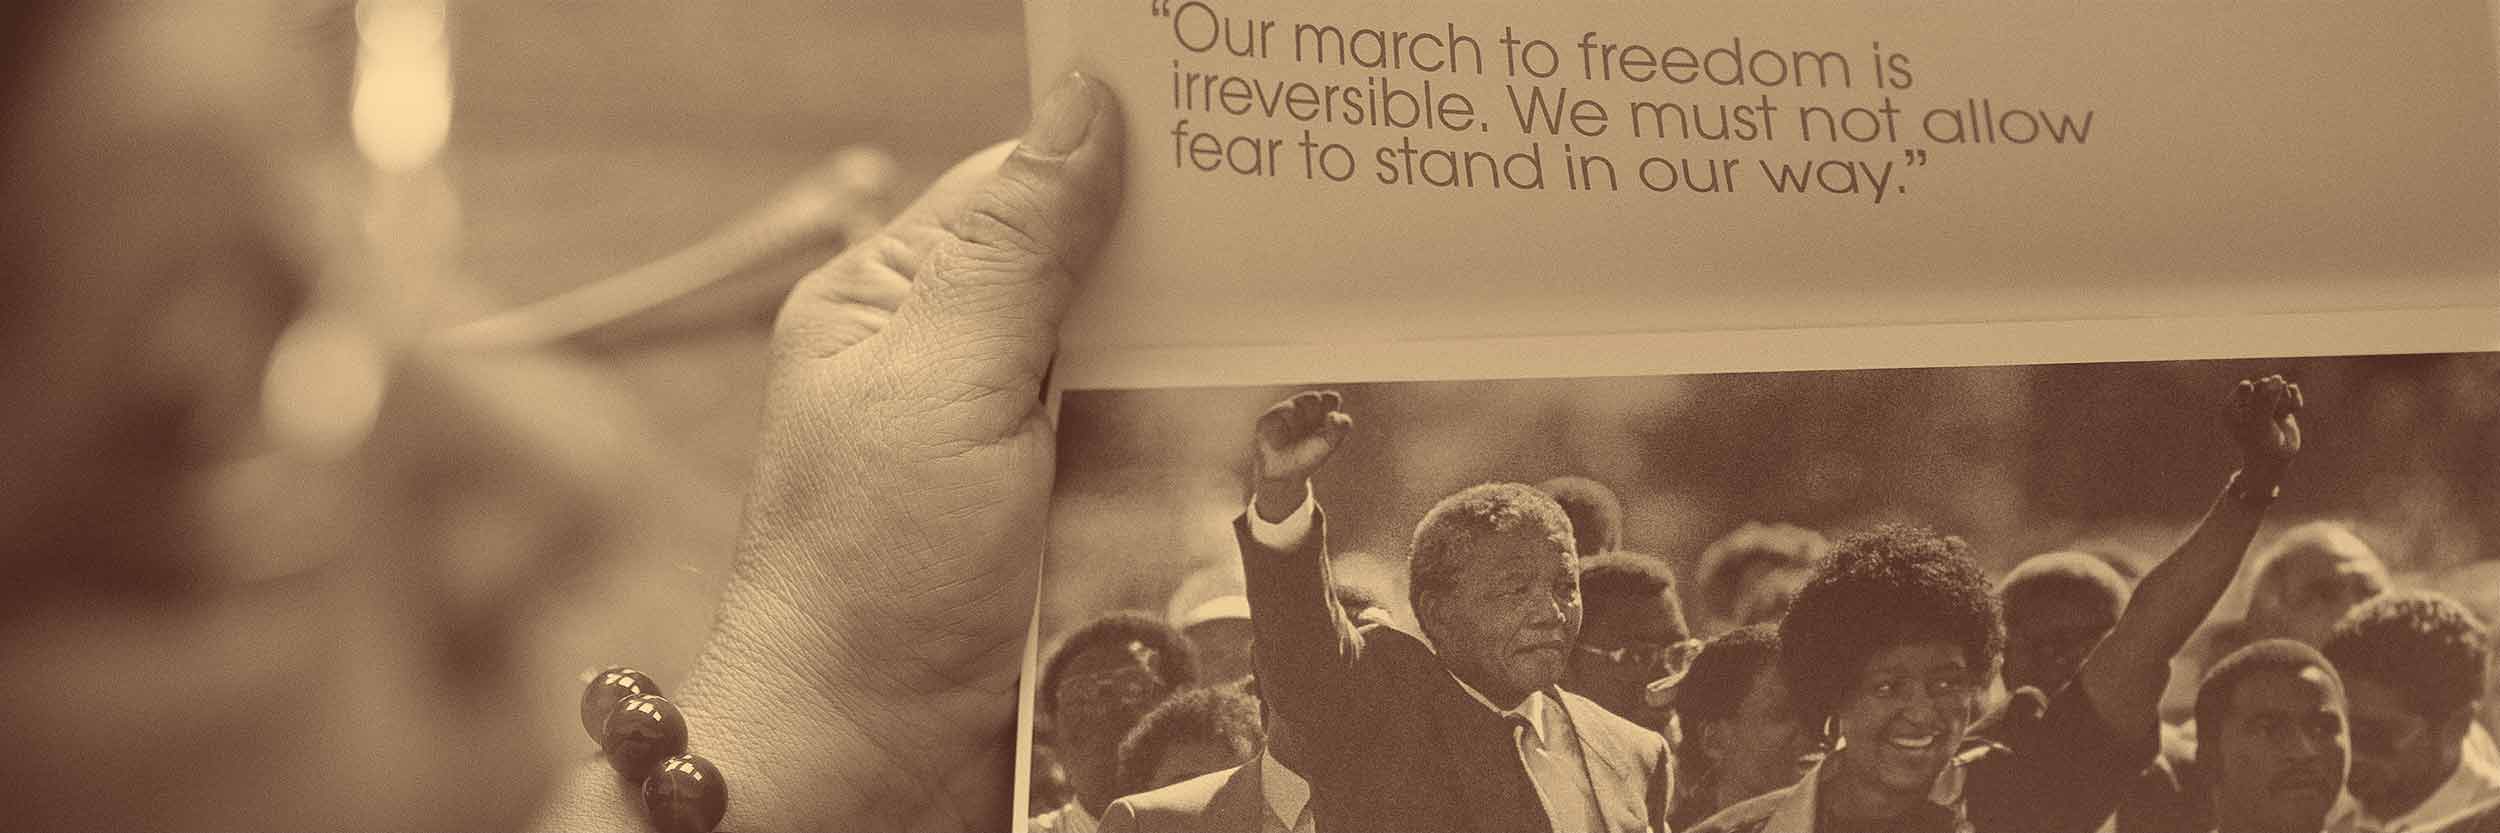 A woman holds up a booklet with a photo of Nelson Mandela hoding up his fist and his wife's had, while surrounded by people.